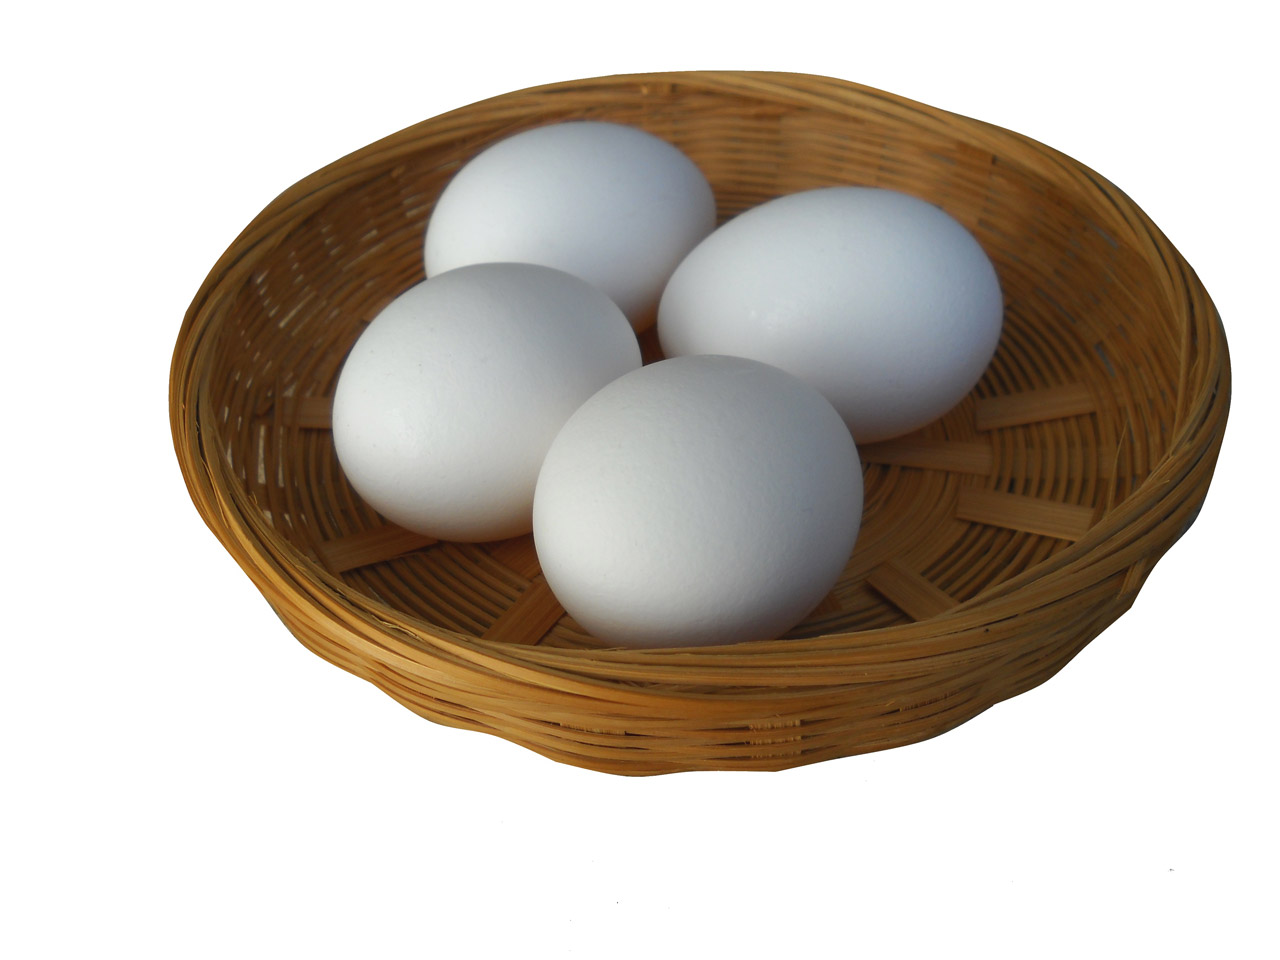 Four eggs in a shallow wicker basket